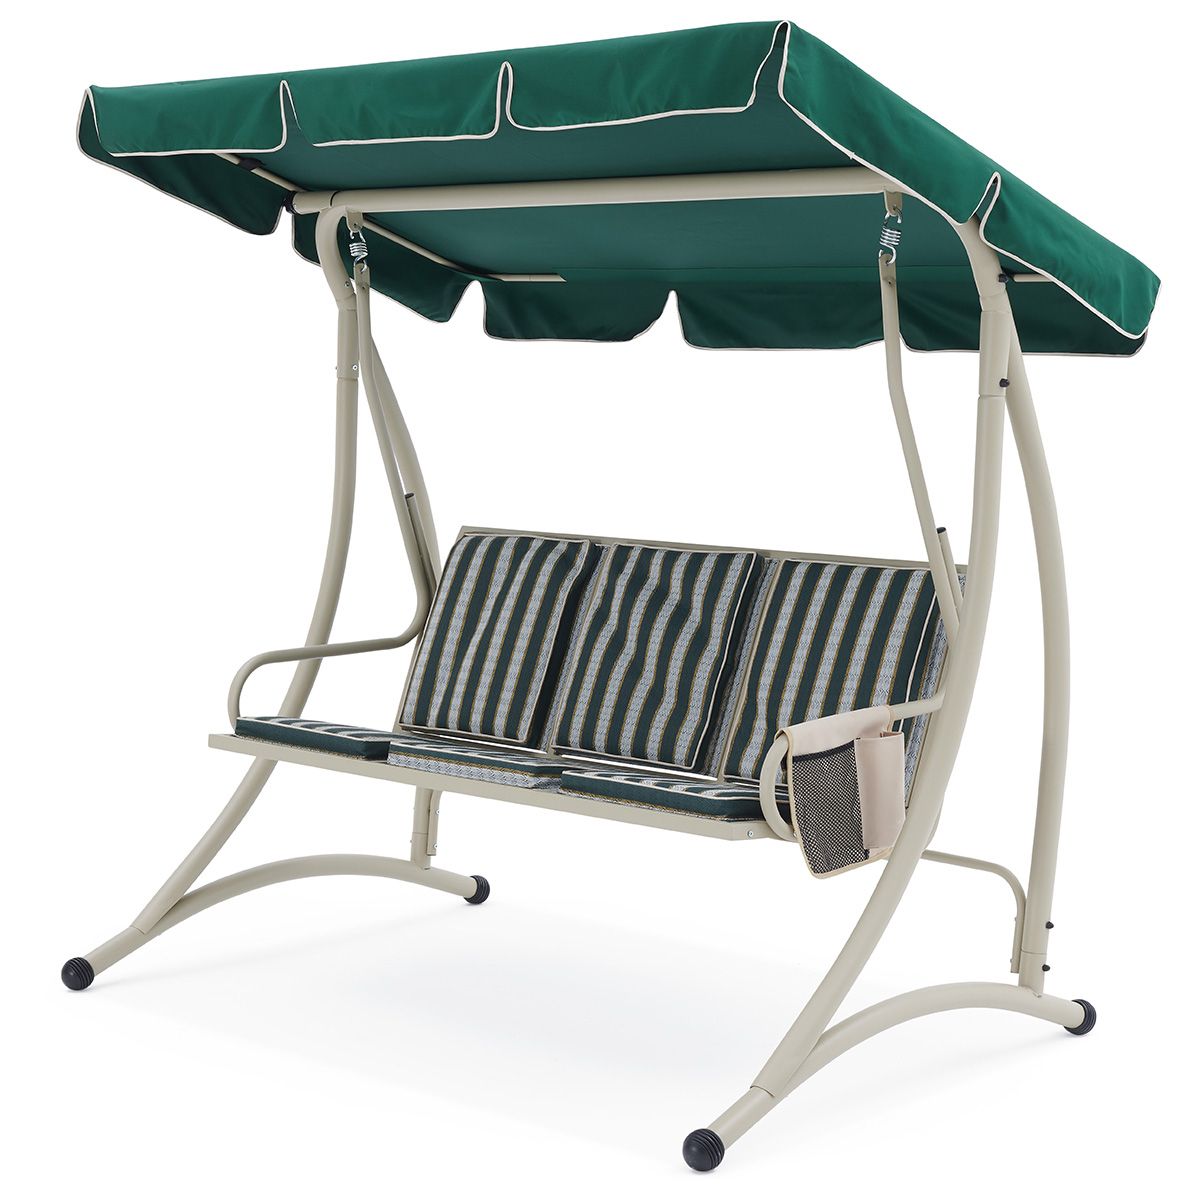 3 Seater Swings With Frame And Canopy With Regard To Most Recently Released Korina 3 Seater Swing (View 9 of 30)